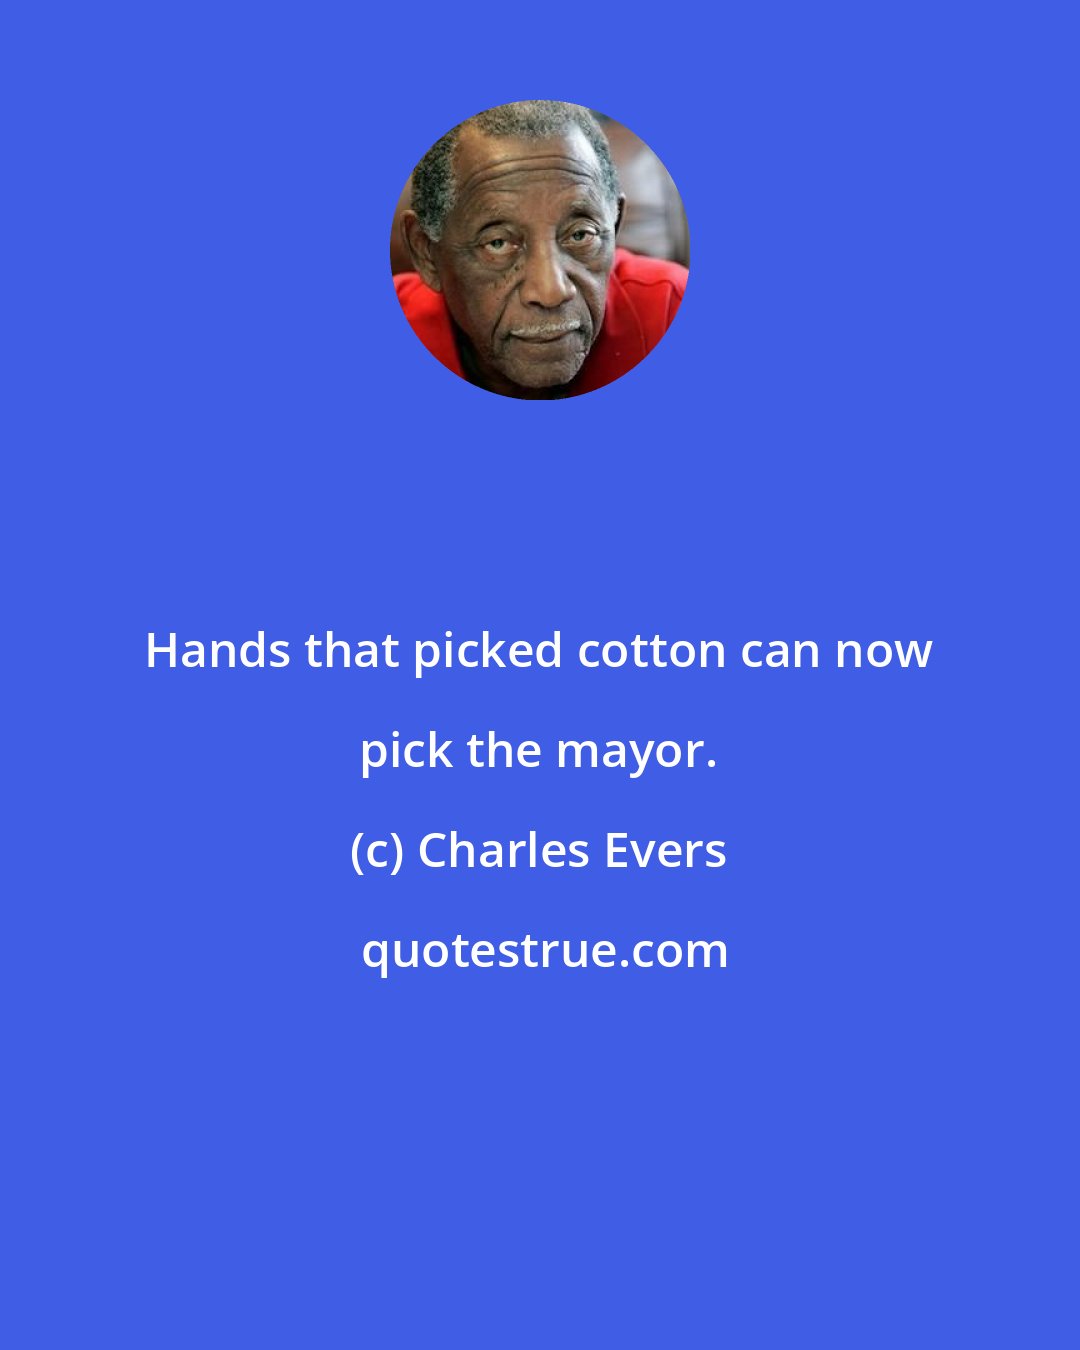 Charles Evers: Hands that picked cotton can now pick the mayor.